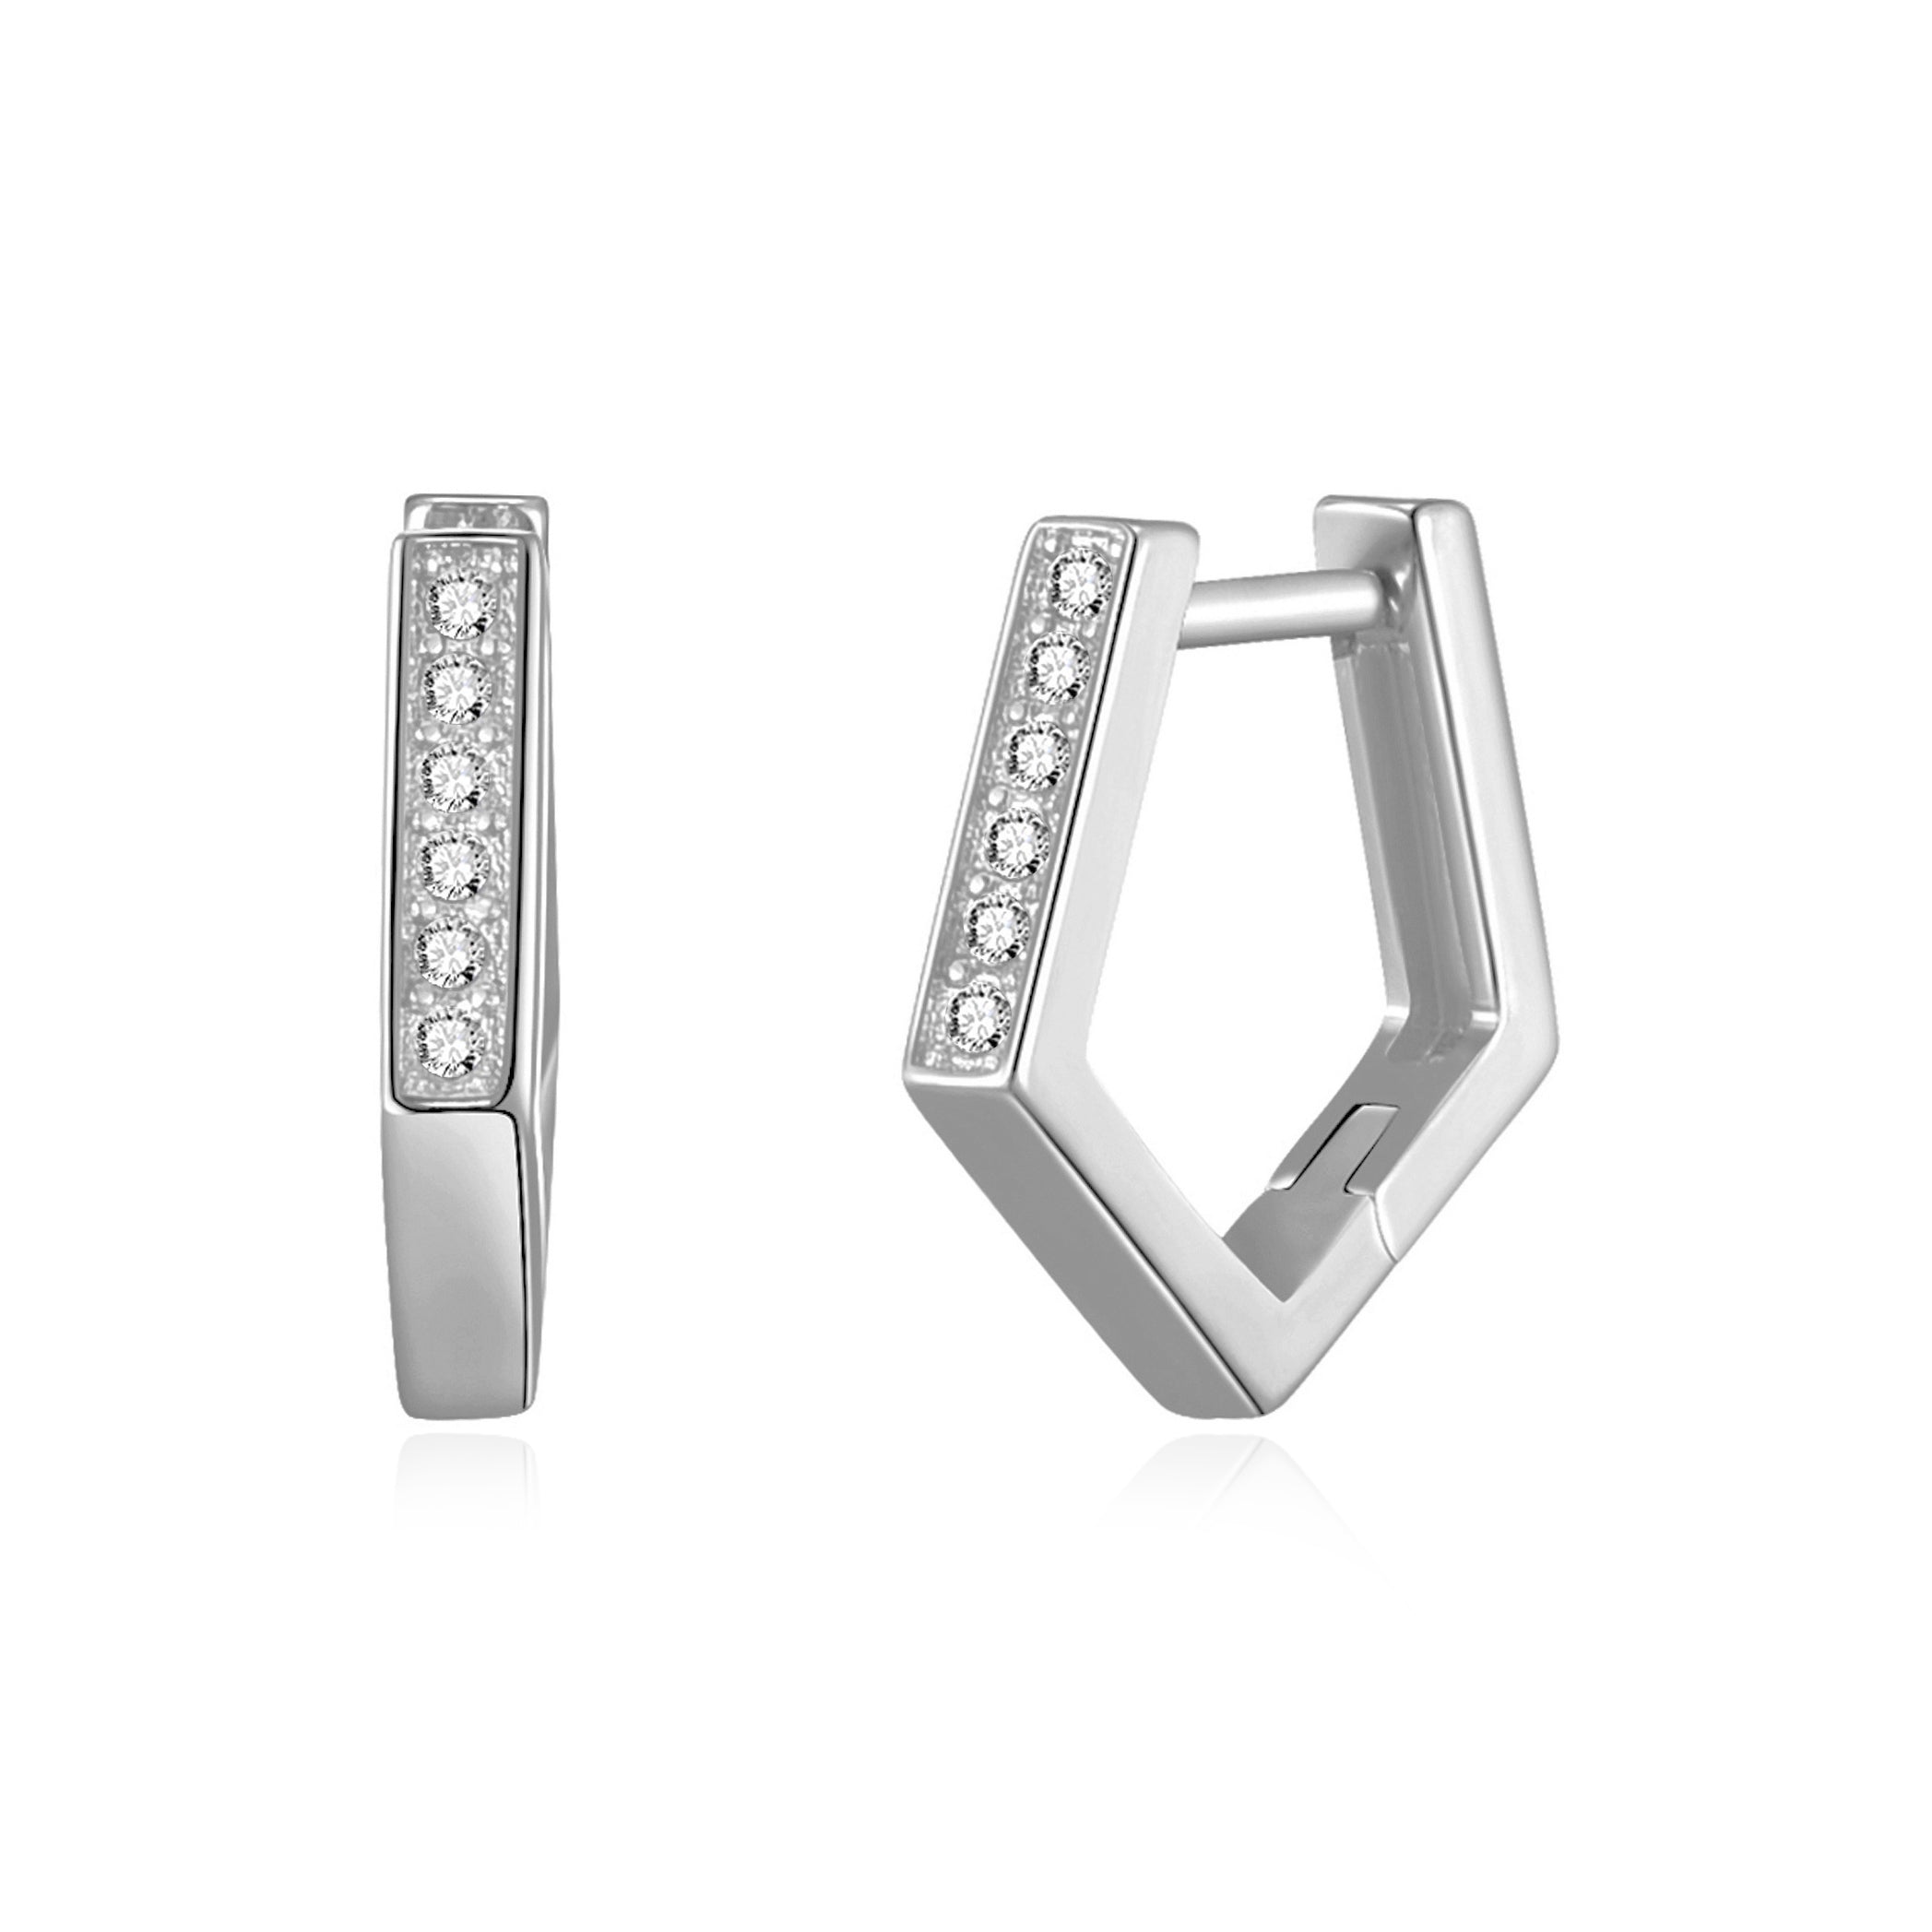 Silver Plated Geometric Hoop Earrings Created with Zircondia® Crystals